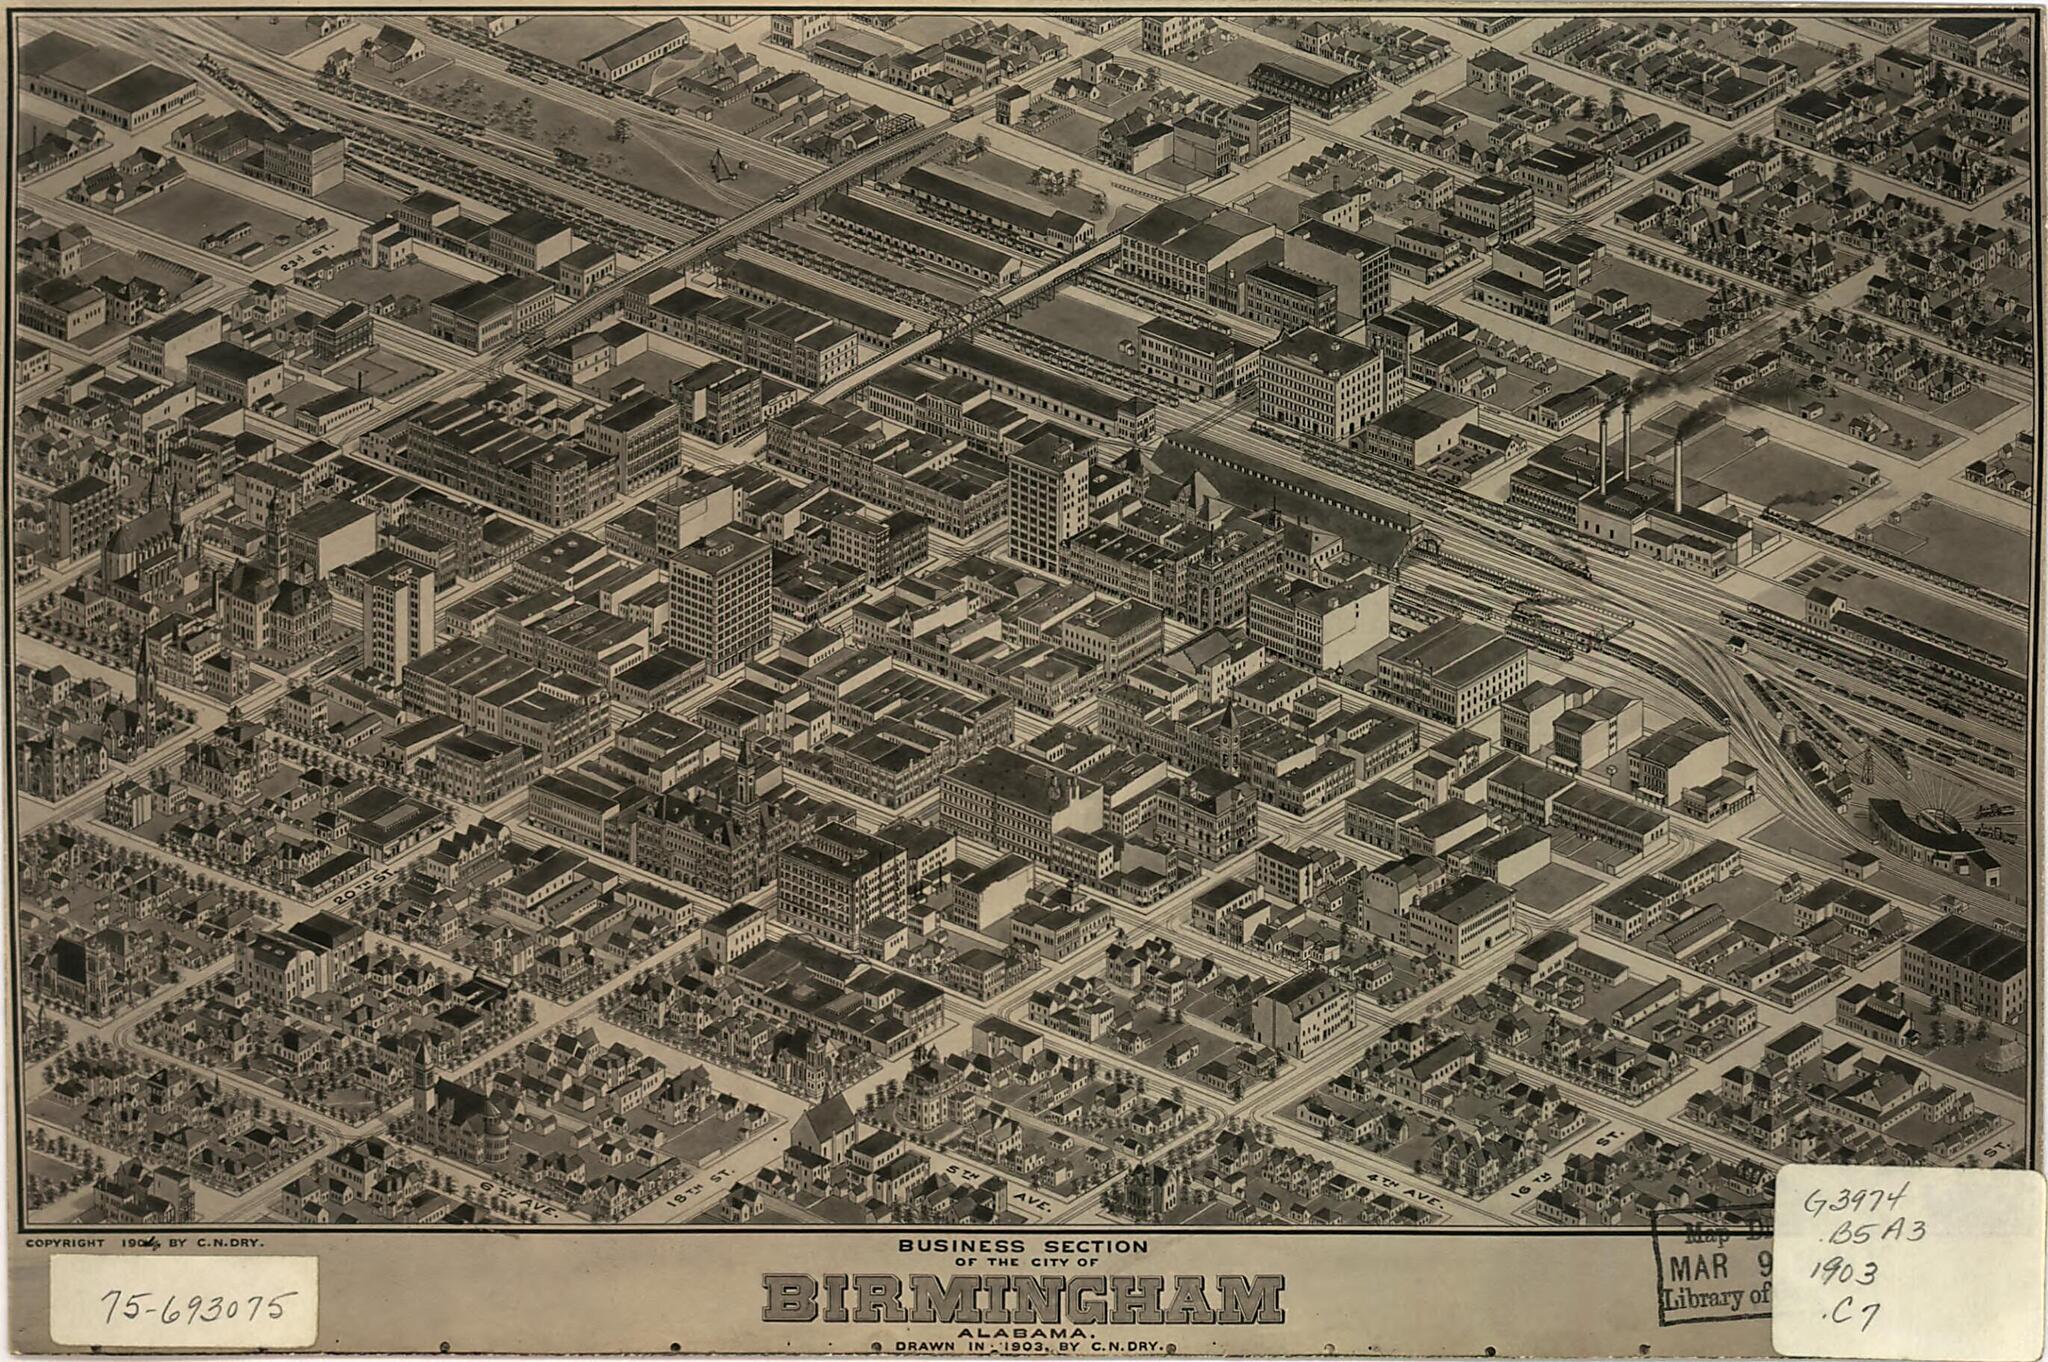 This old map of Business Section of the City of Birmingham, Alabama from 1904 was created by Camille N. Dry in 1904